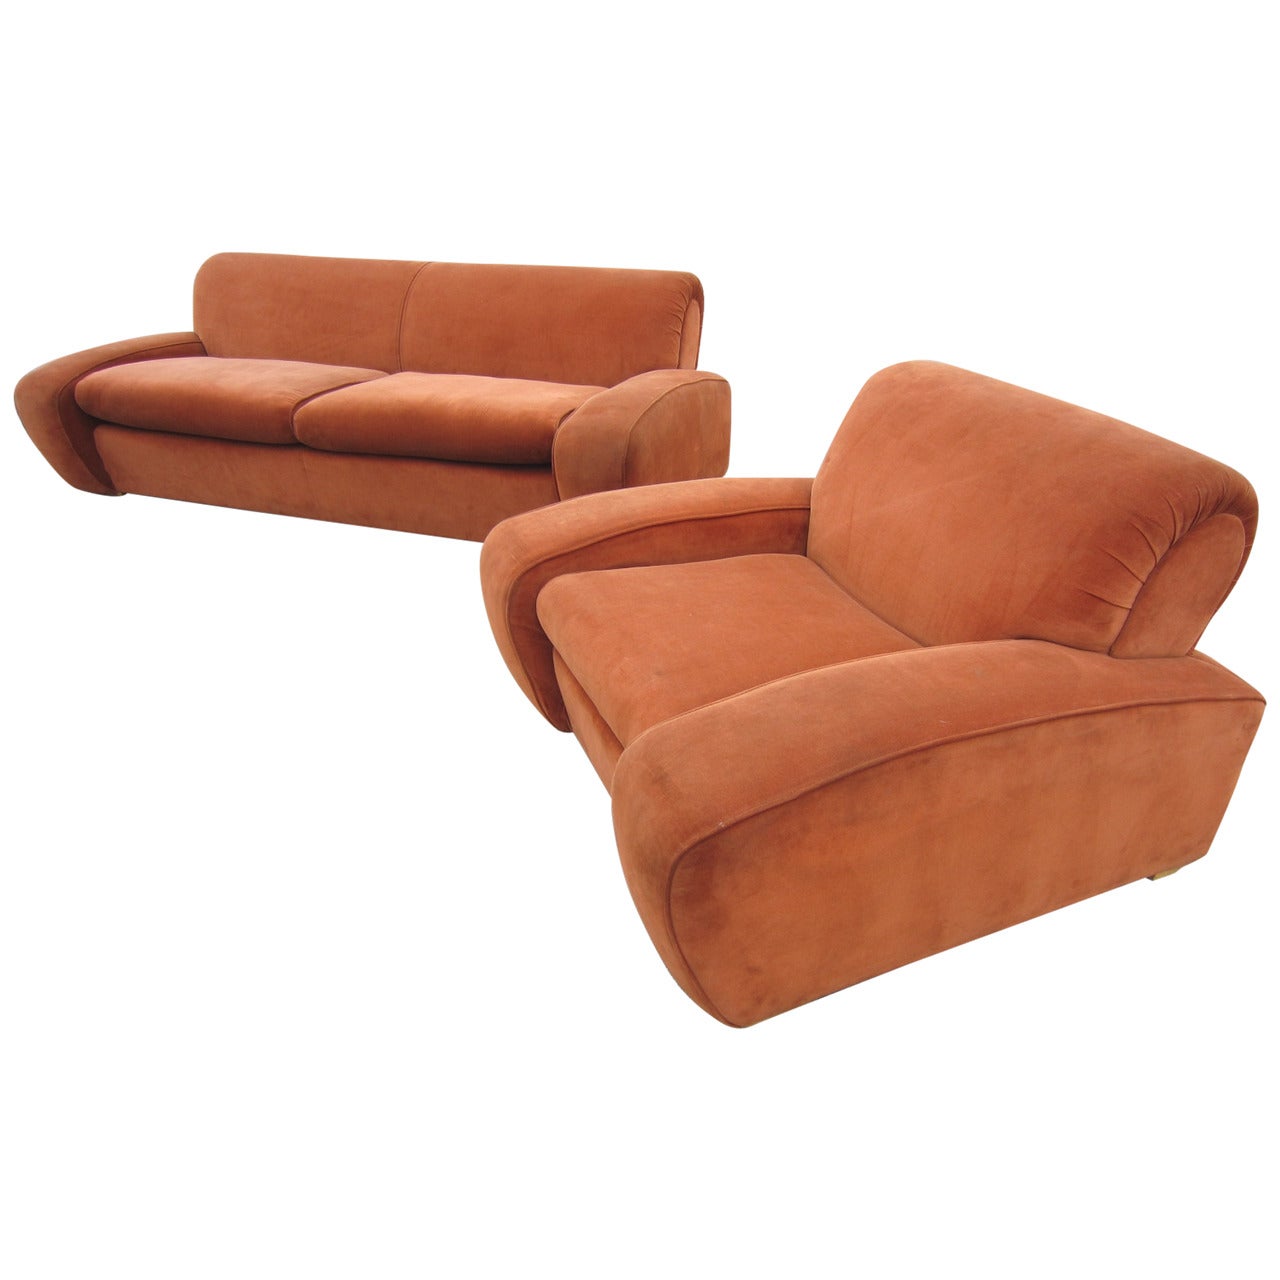 Mid-20th Century Art Deco Paul Frankl Lounge Chair and Sofa Set